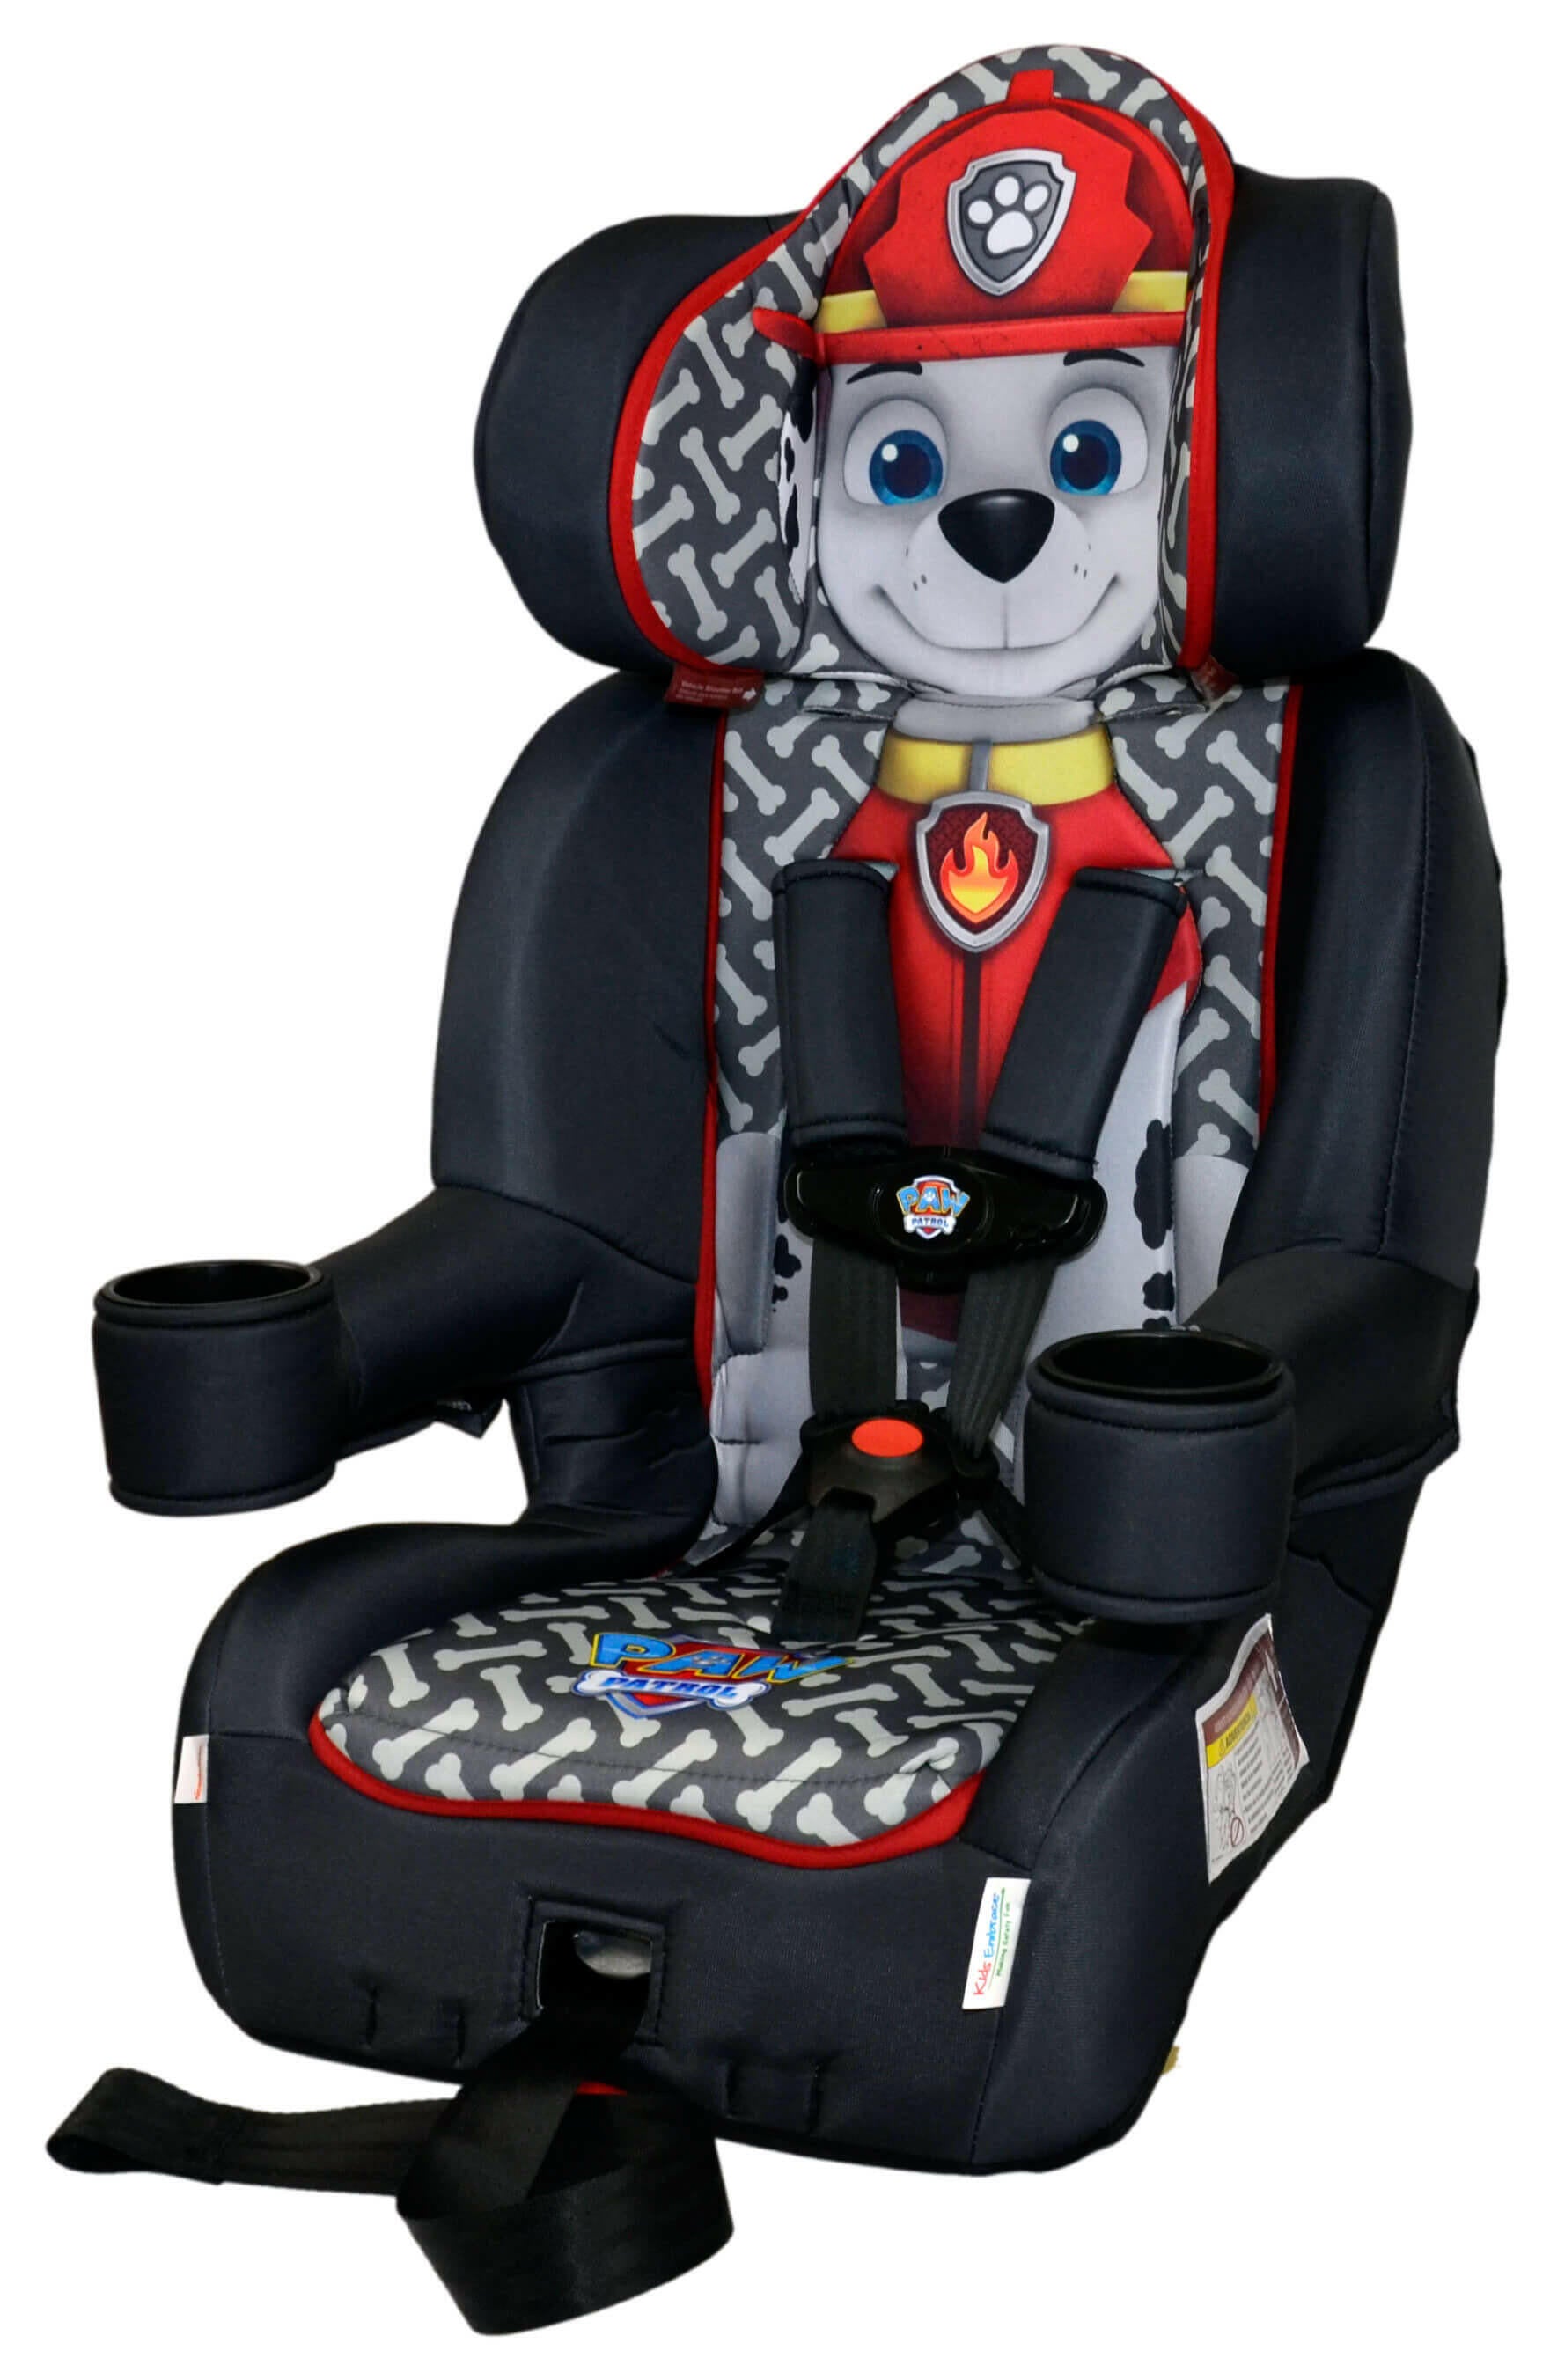 Kids Paw Patrol Marshall Combination Booster Car Seat - Kids Eye Candy 